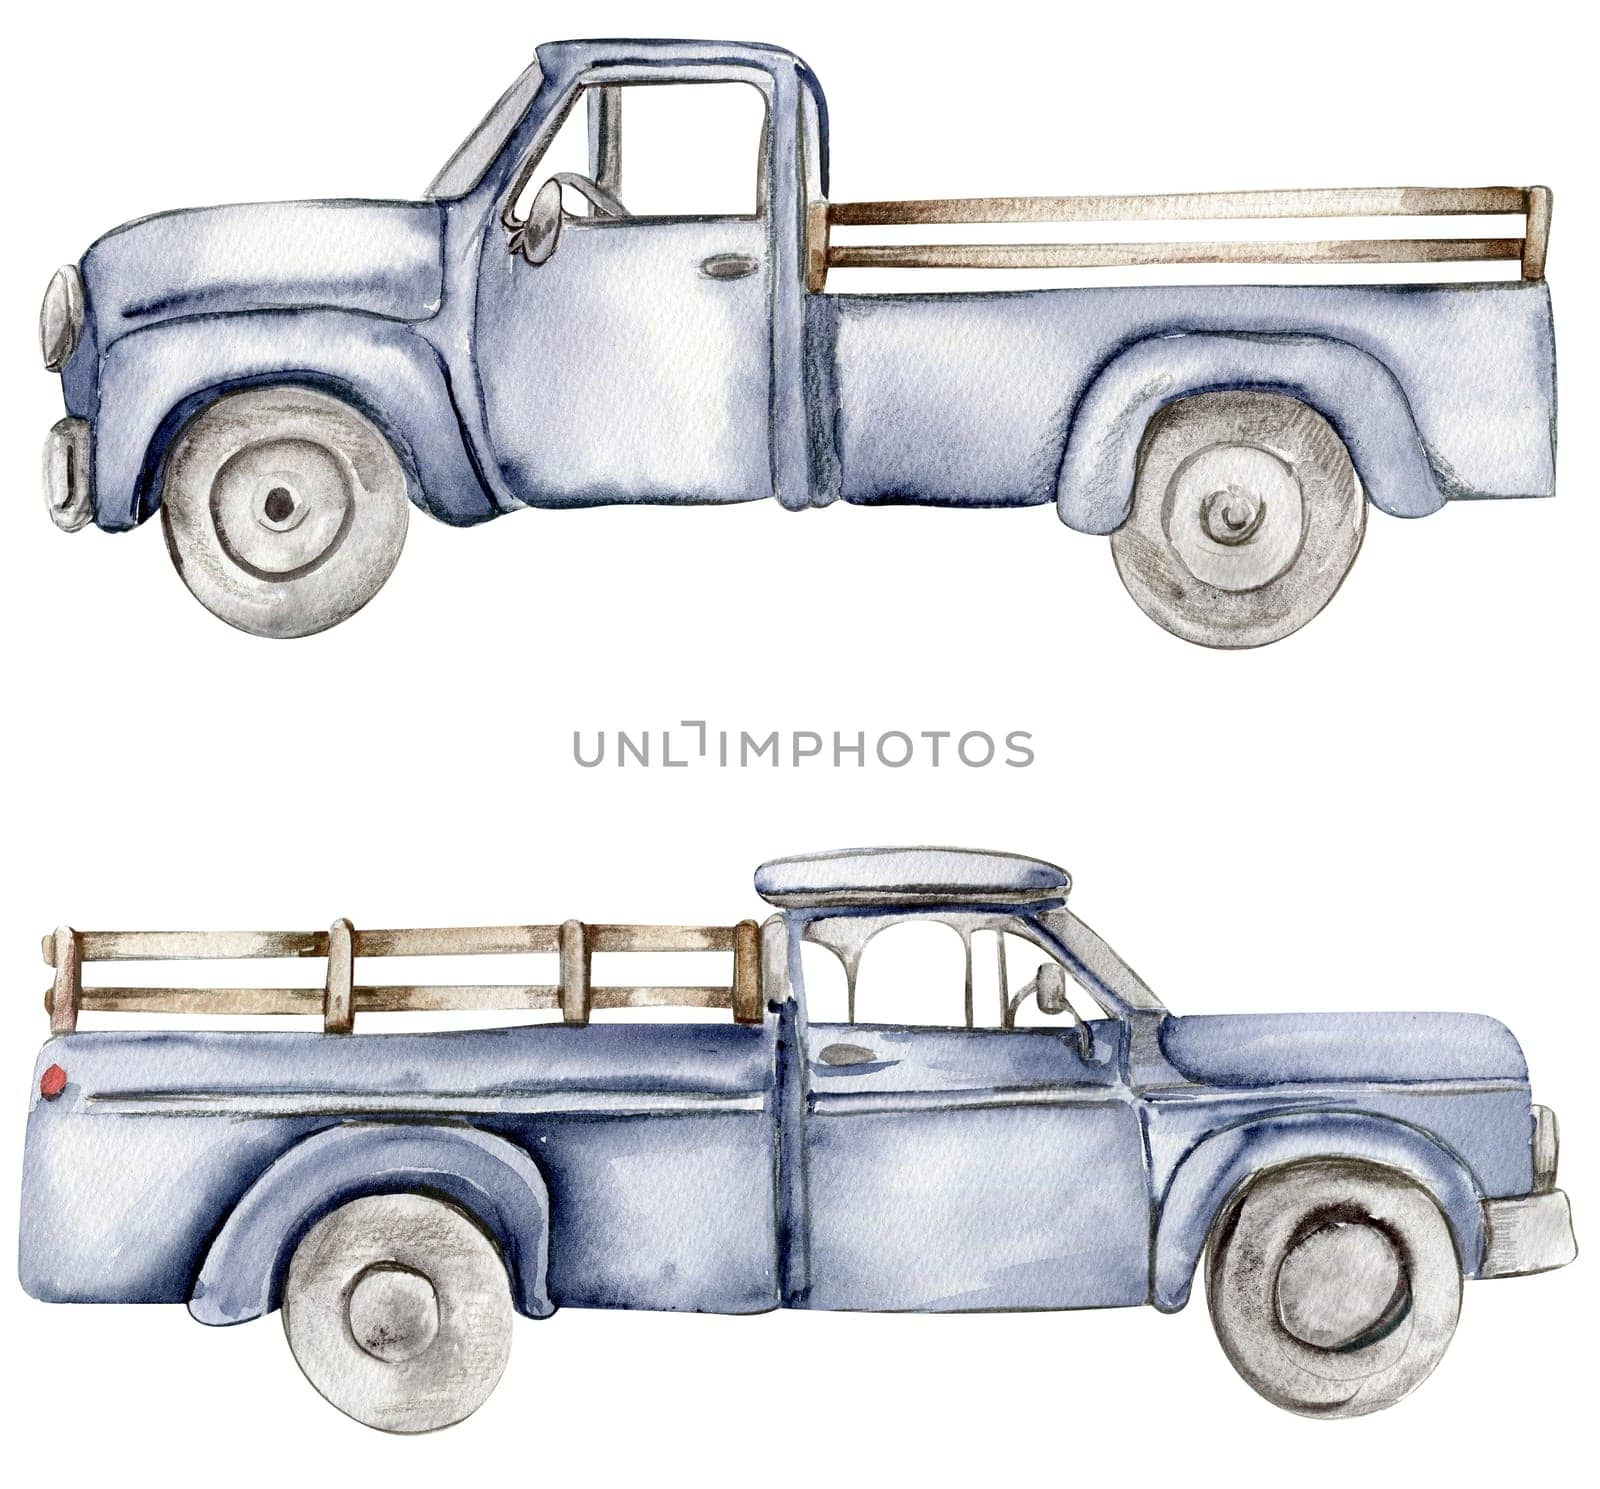 Vintage watercolor blue truck, hand drawn ilustration of old retro car on a white background. Perfect for scrapbooking, kids design, wedding invitation, posters, greetings cards.